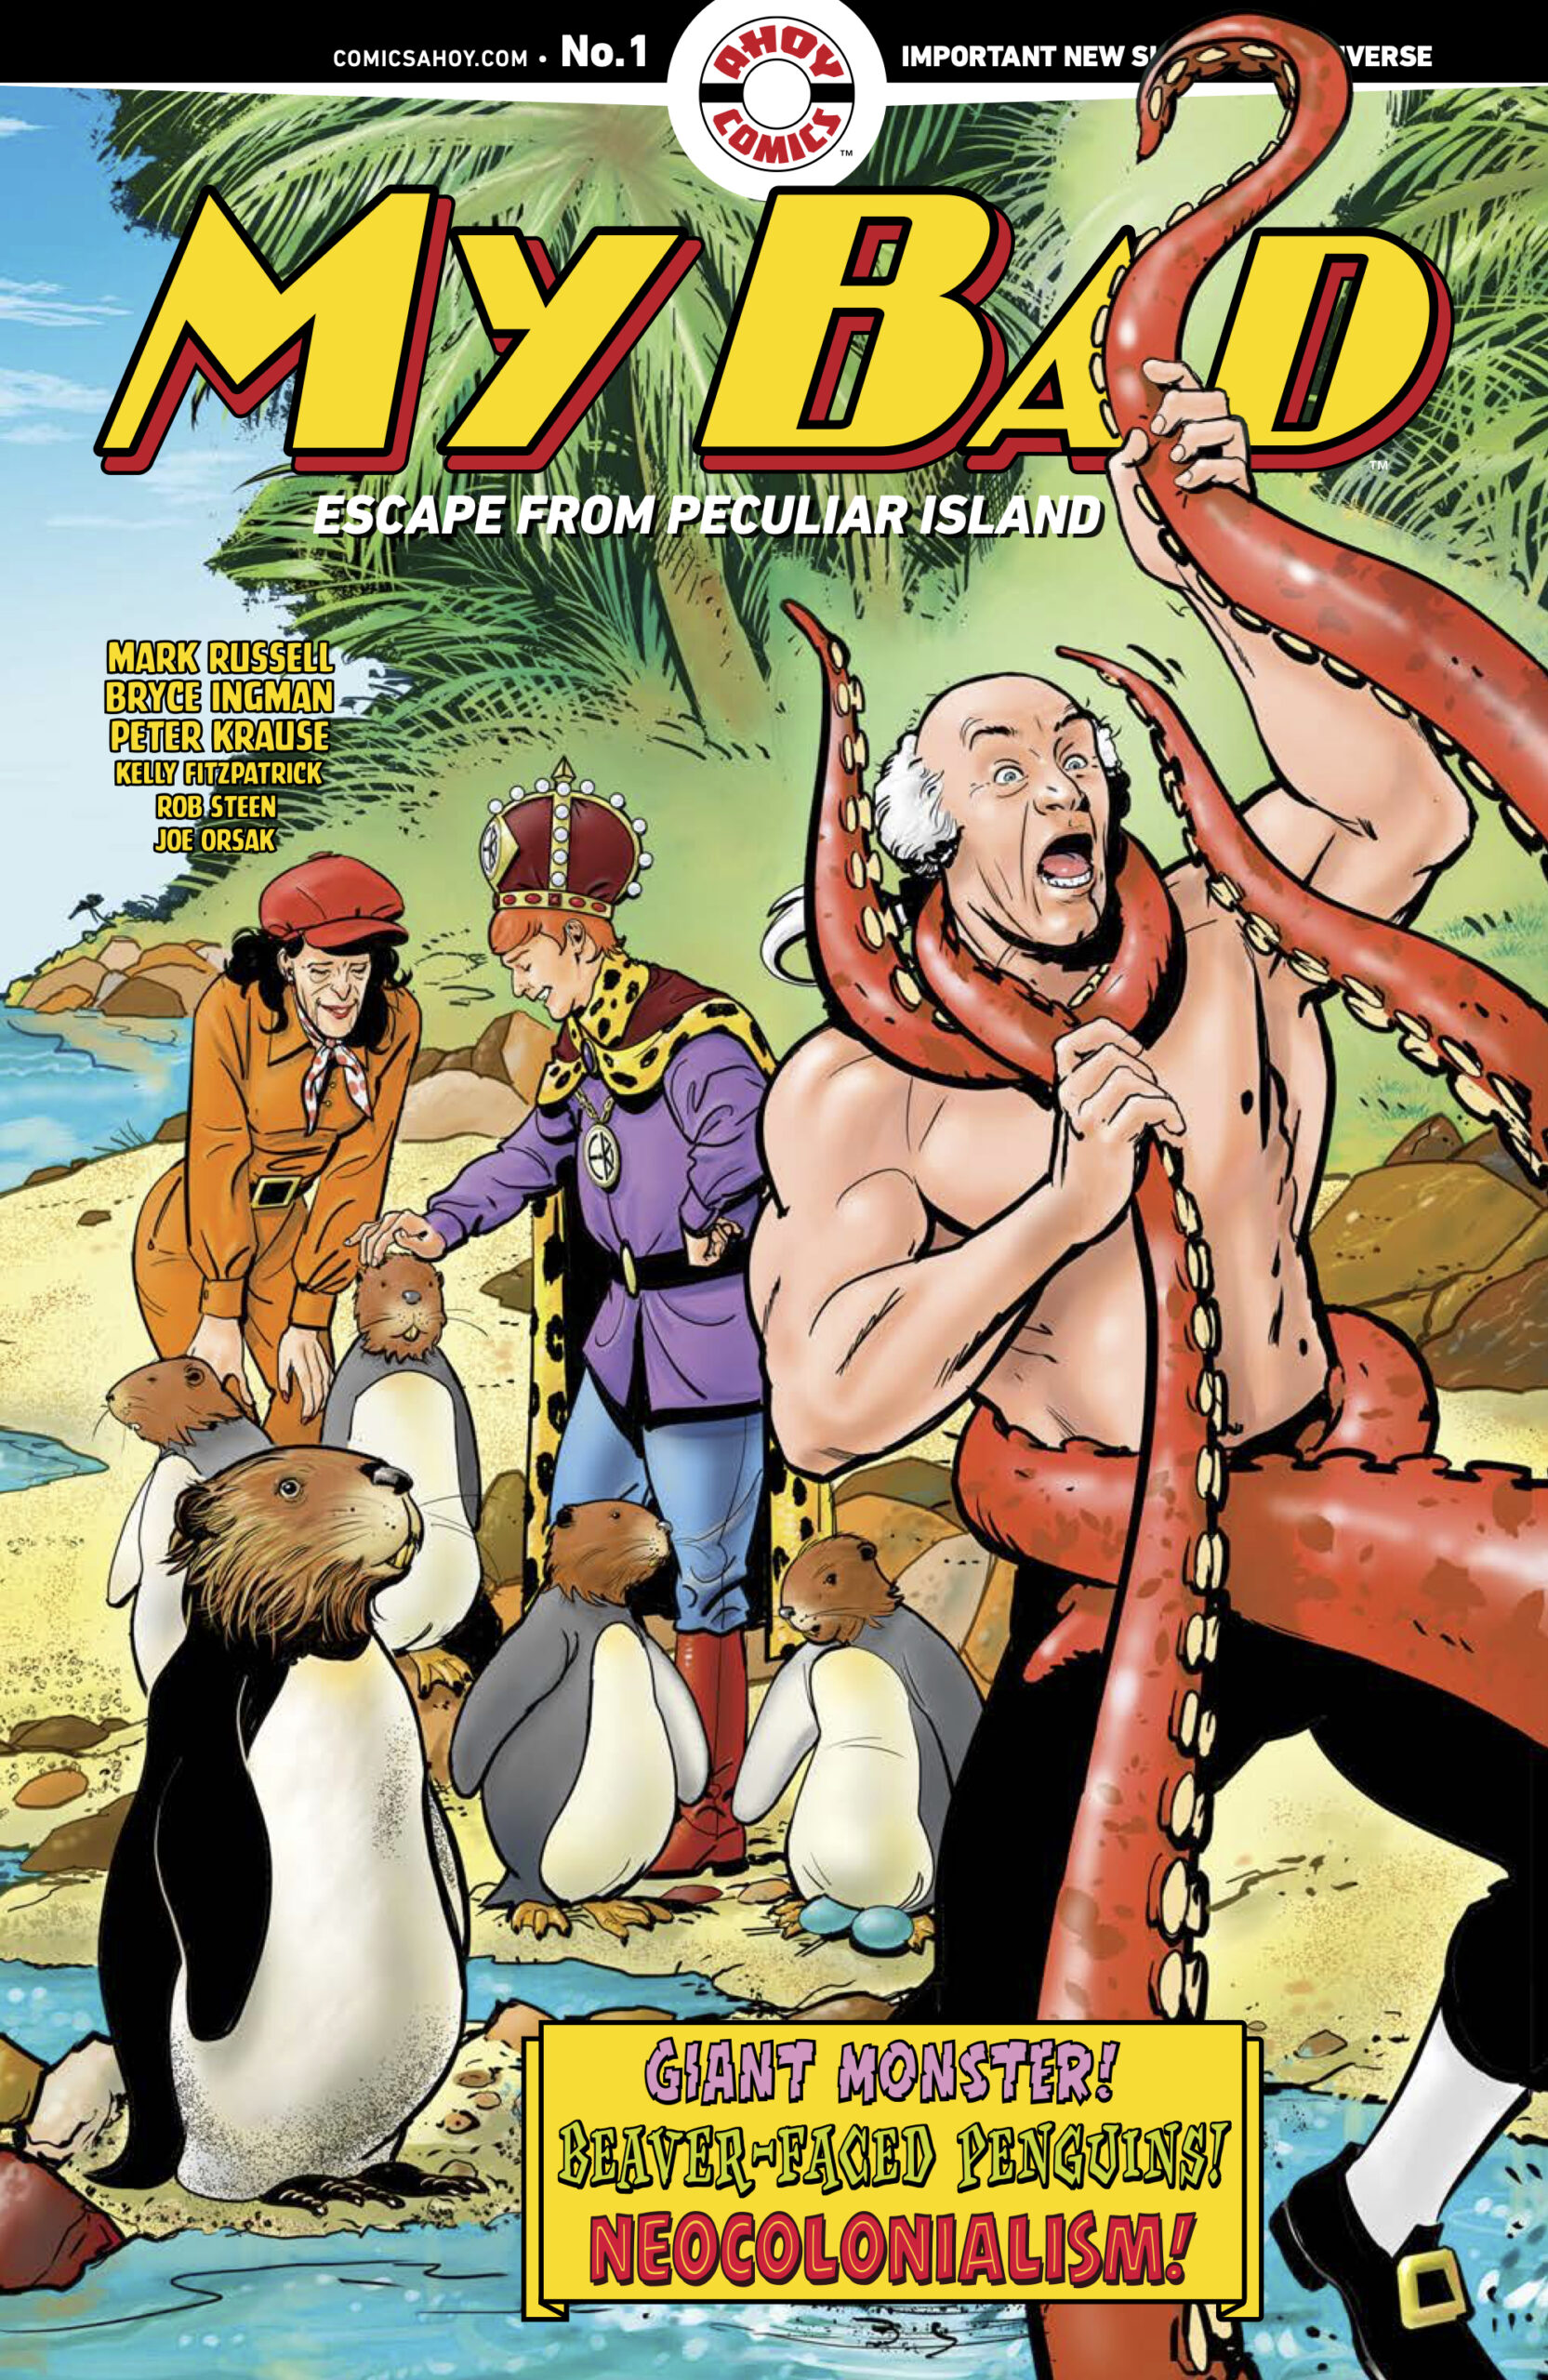 AHOY Comics Unleashed the Absurdity in “MY BAD: ESCAPE FROM PECULIAR ISLAND” #1 on May 15th!